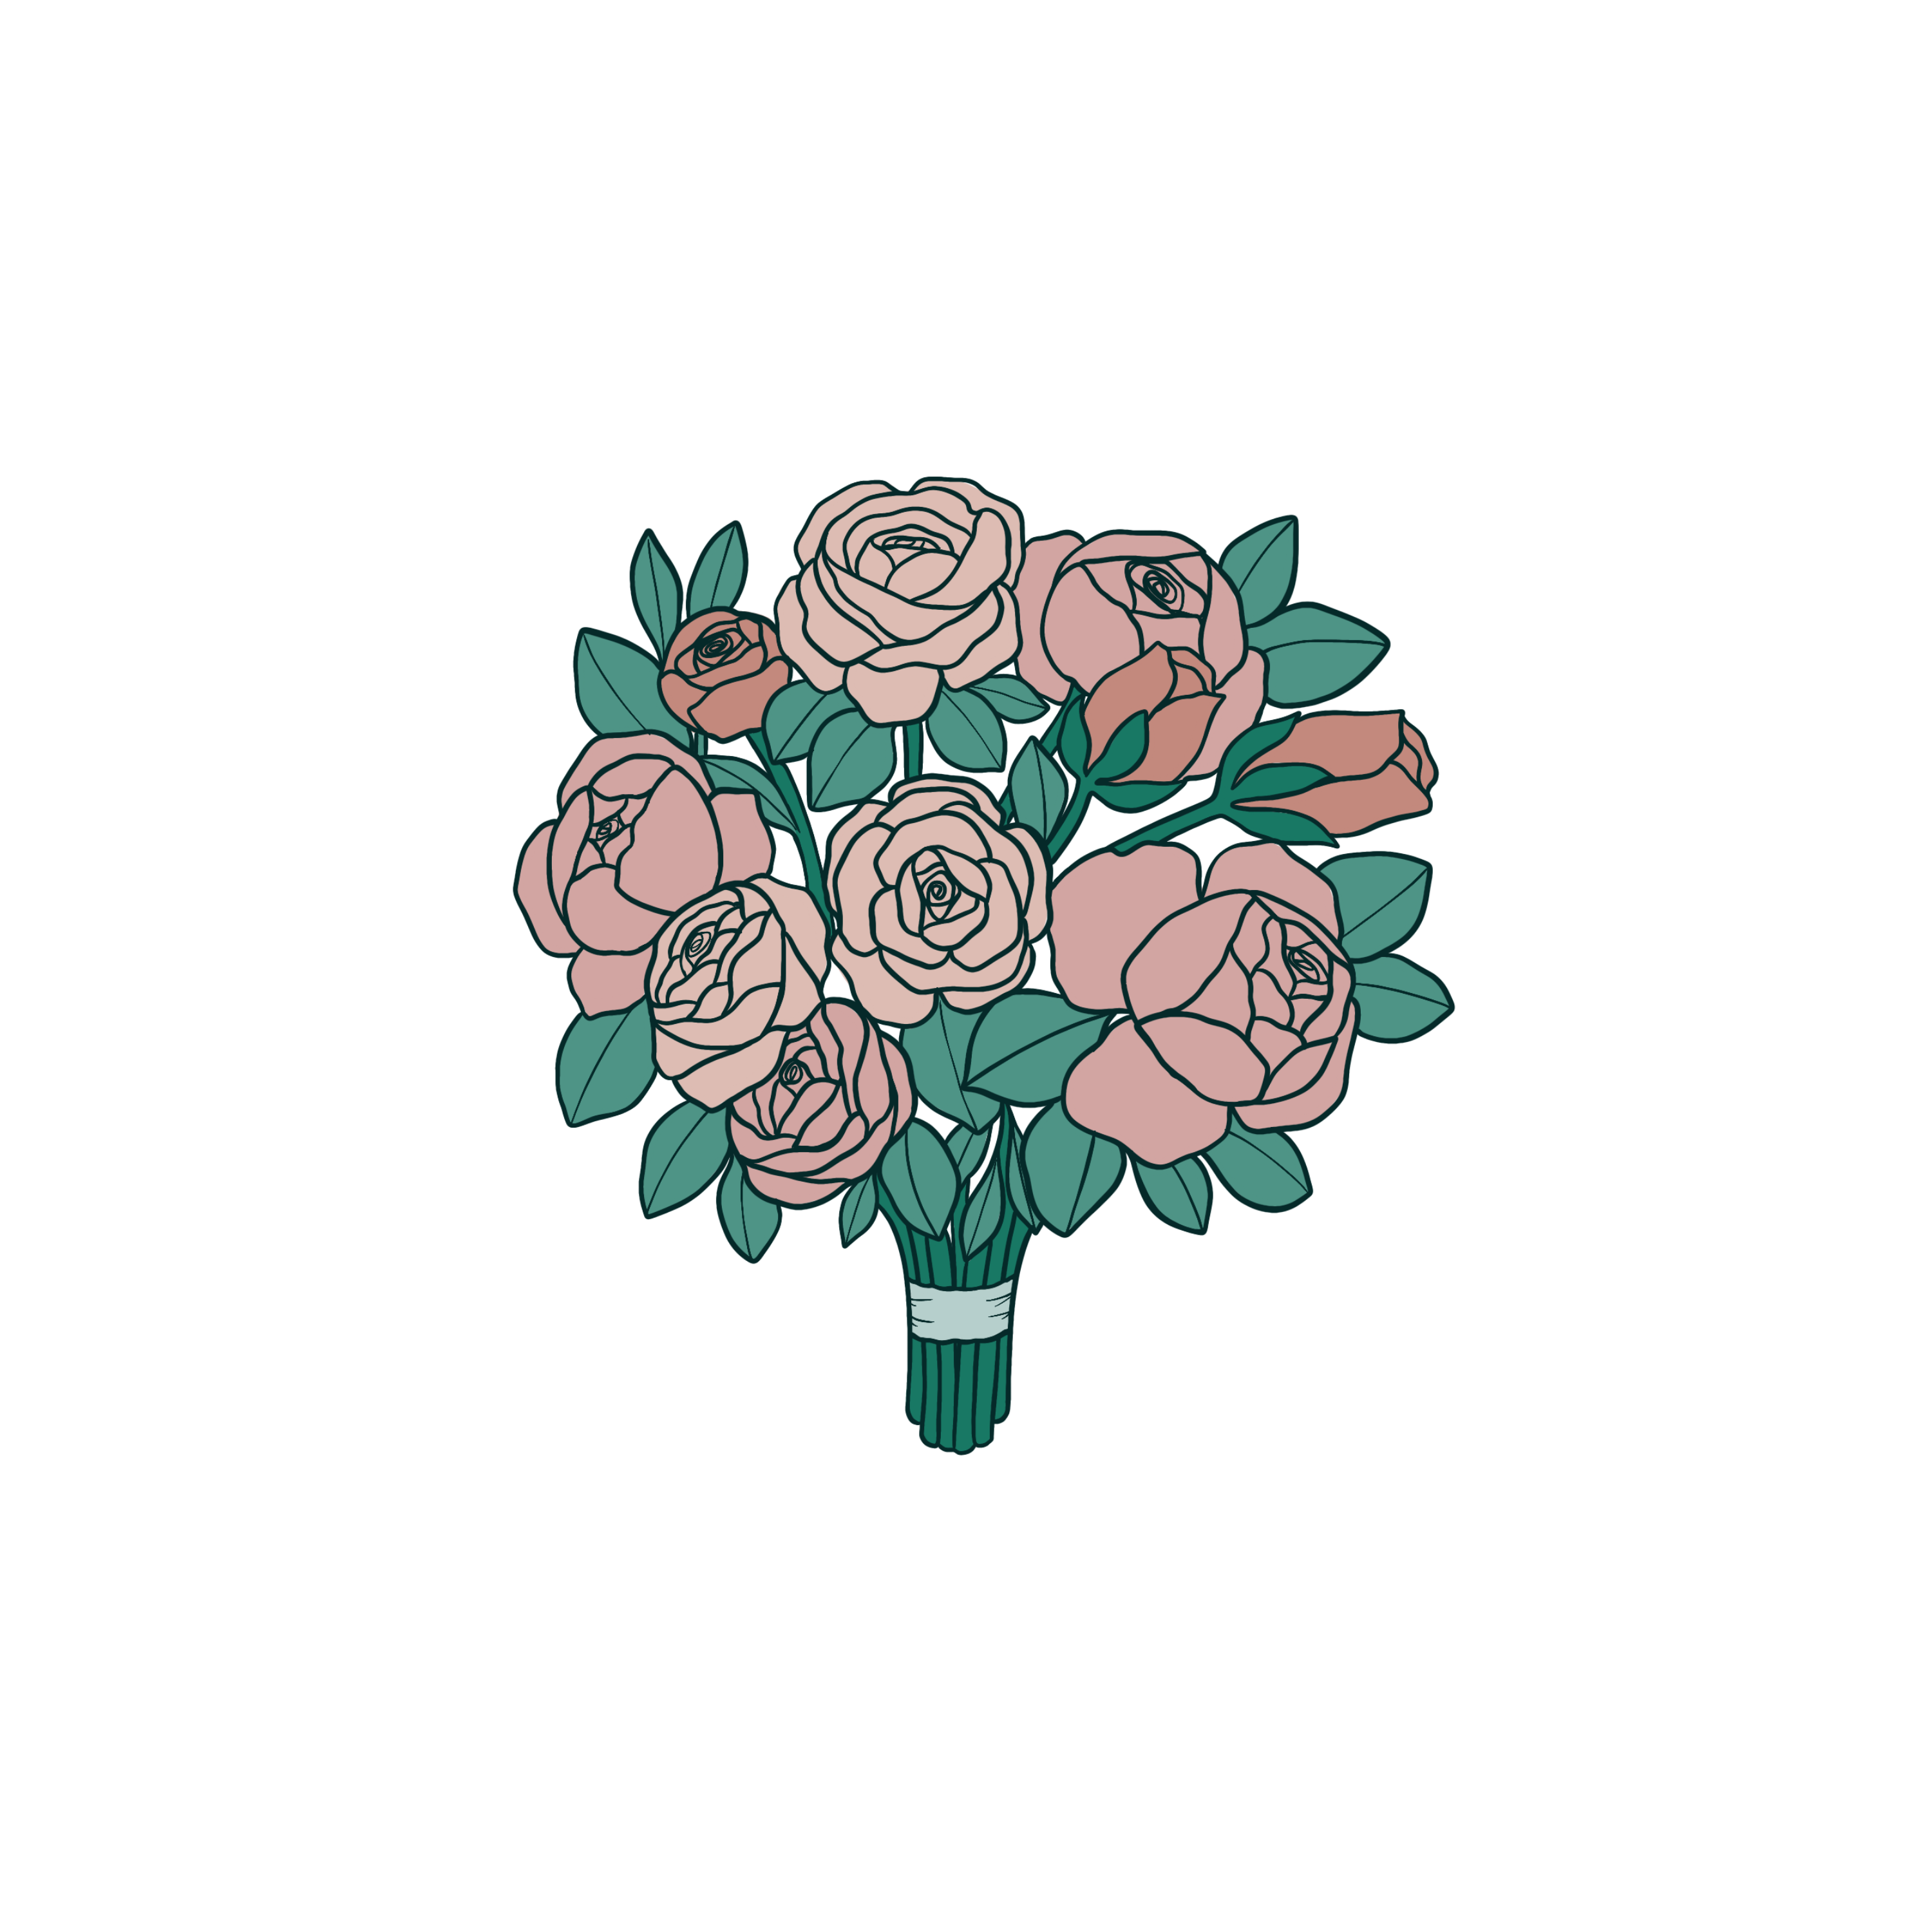 An illustration of a bouquet of pink flowers